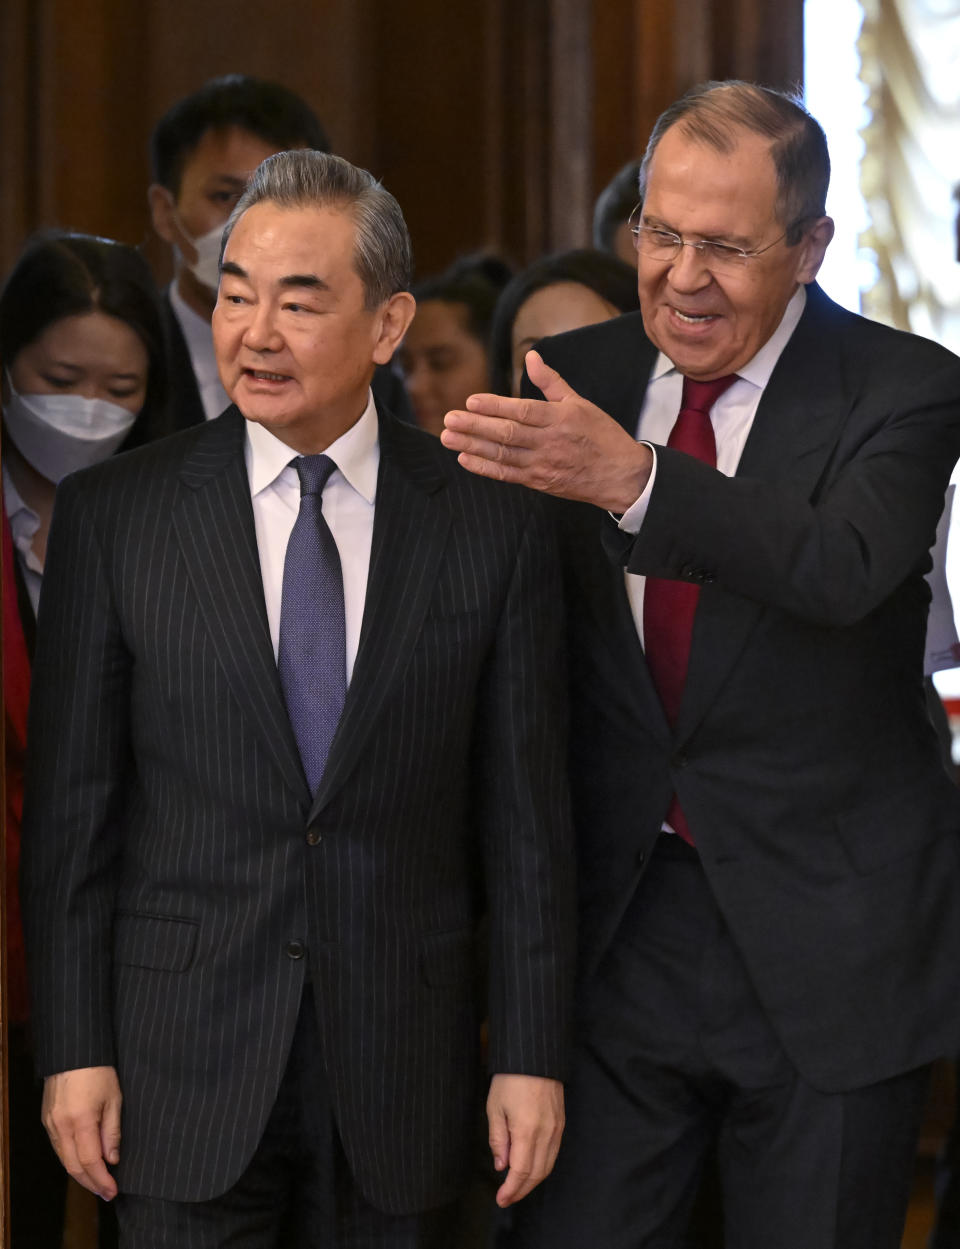 Russian Foreign Minister Sergey Lavrov, right, welcomes the Chinese Communist Party's foreign policy chief Wang Yi for their talks in Moscow, Russia, Wednesday, Feb. 22, 2023. (Alexander Nemenov/Pool Photo via AP)